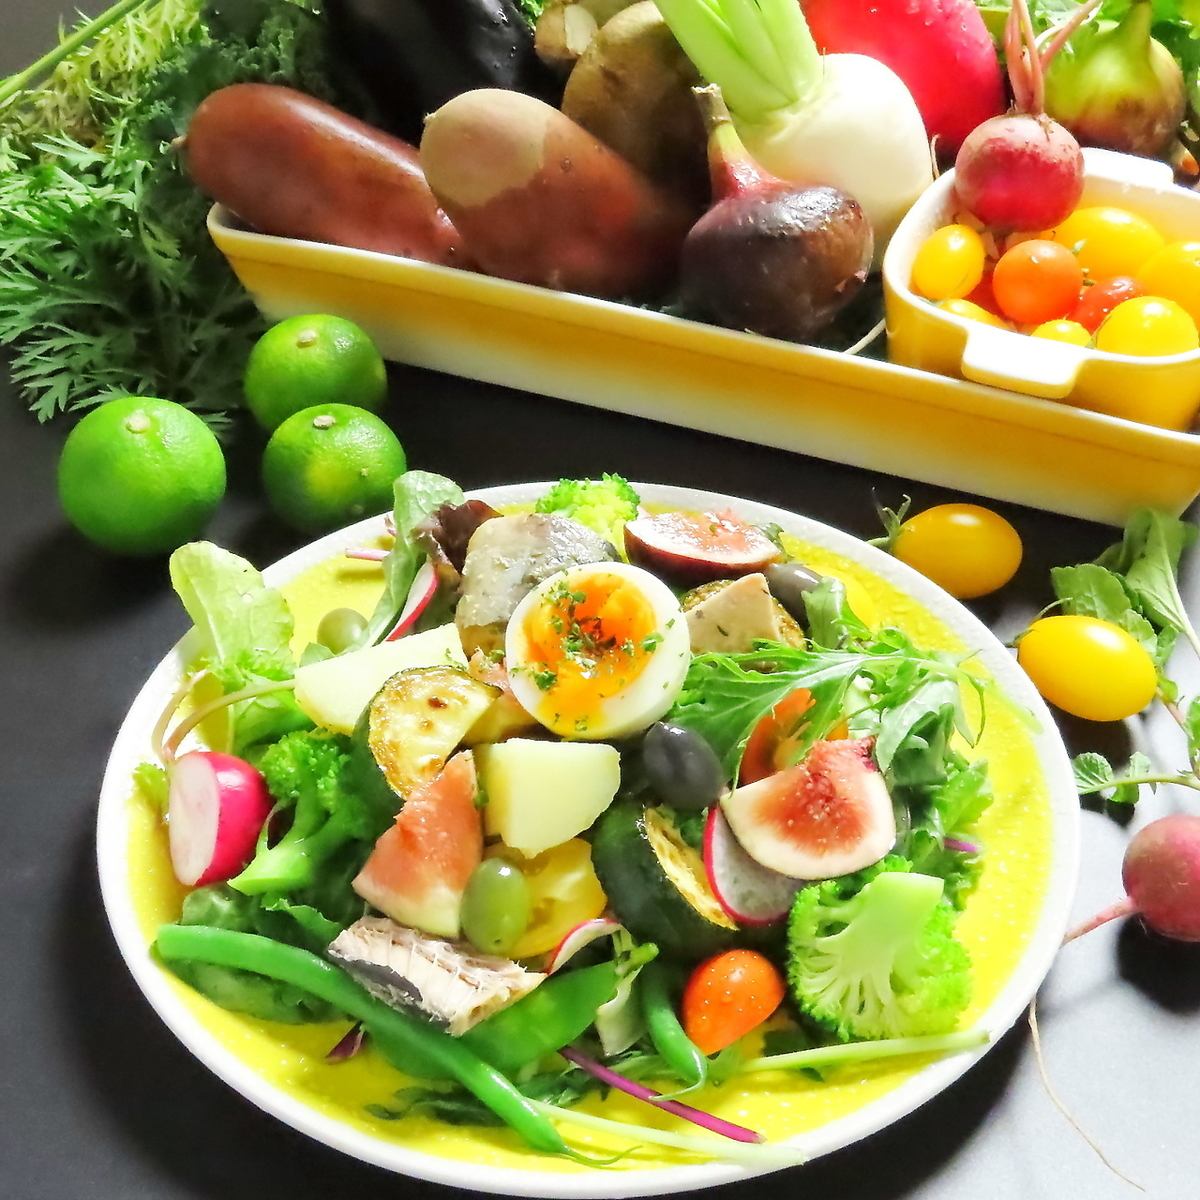 A variety of exquisite dishes made with seasonal vegetables that are pesticide-free and additive-free♪